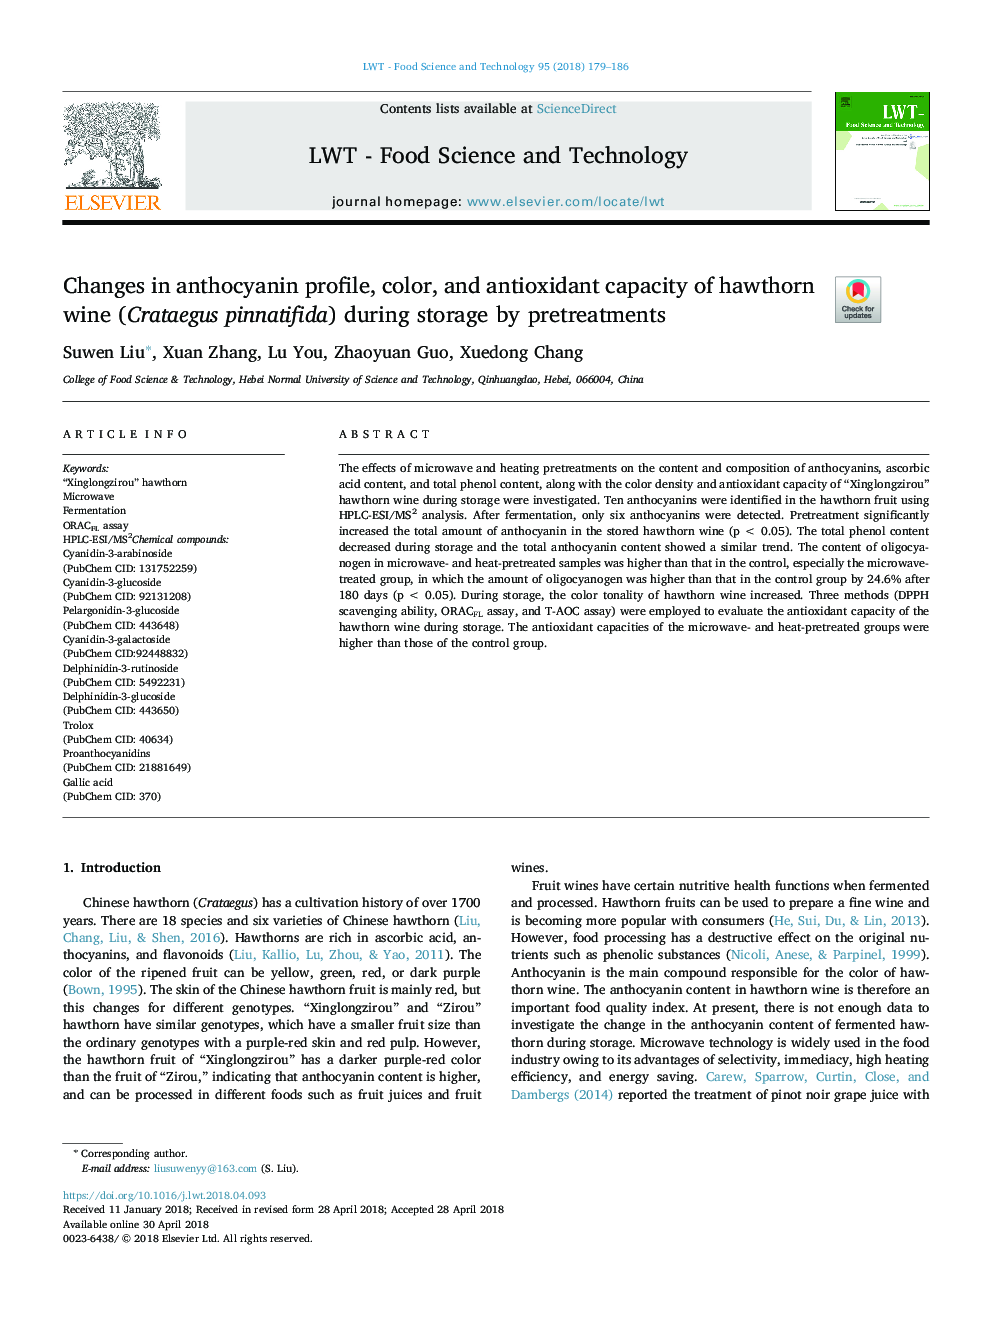 Changes in anthocyanin profile, color, and antioxidant capacity of hawthorn wine (Crataegus pinnatifida) during storage by pretreatments